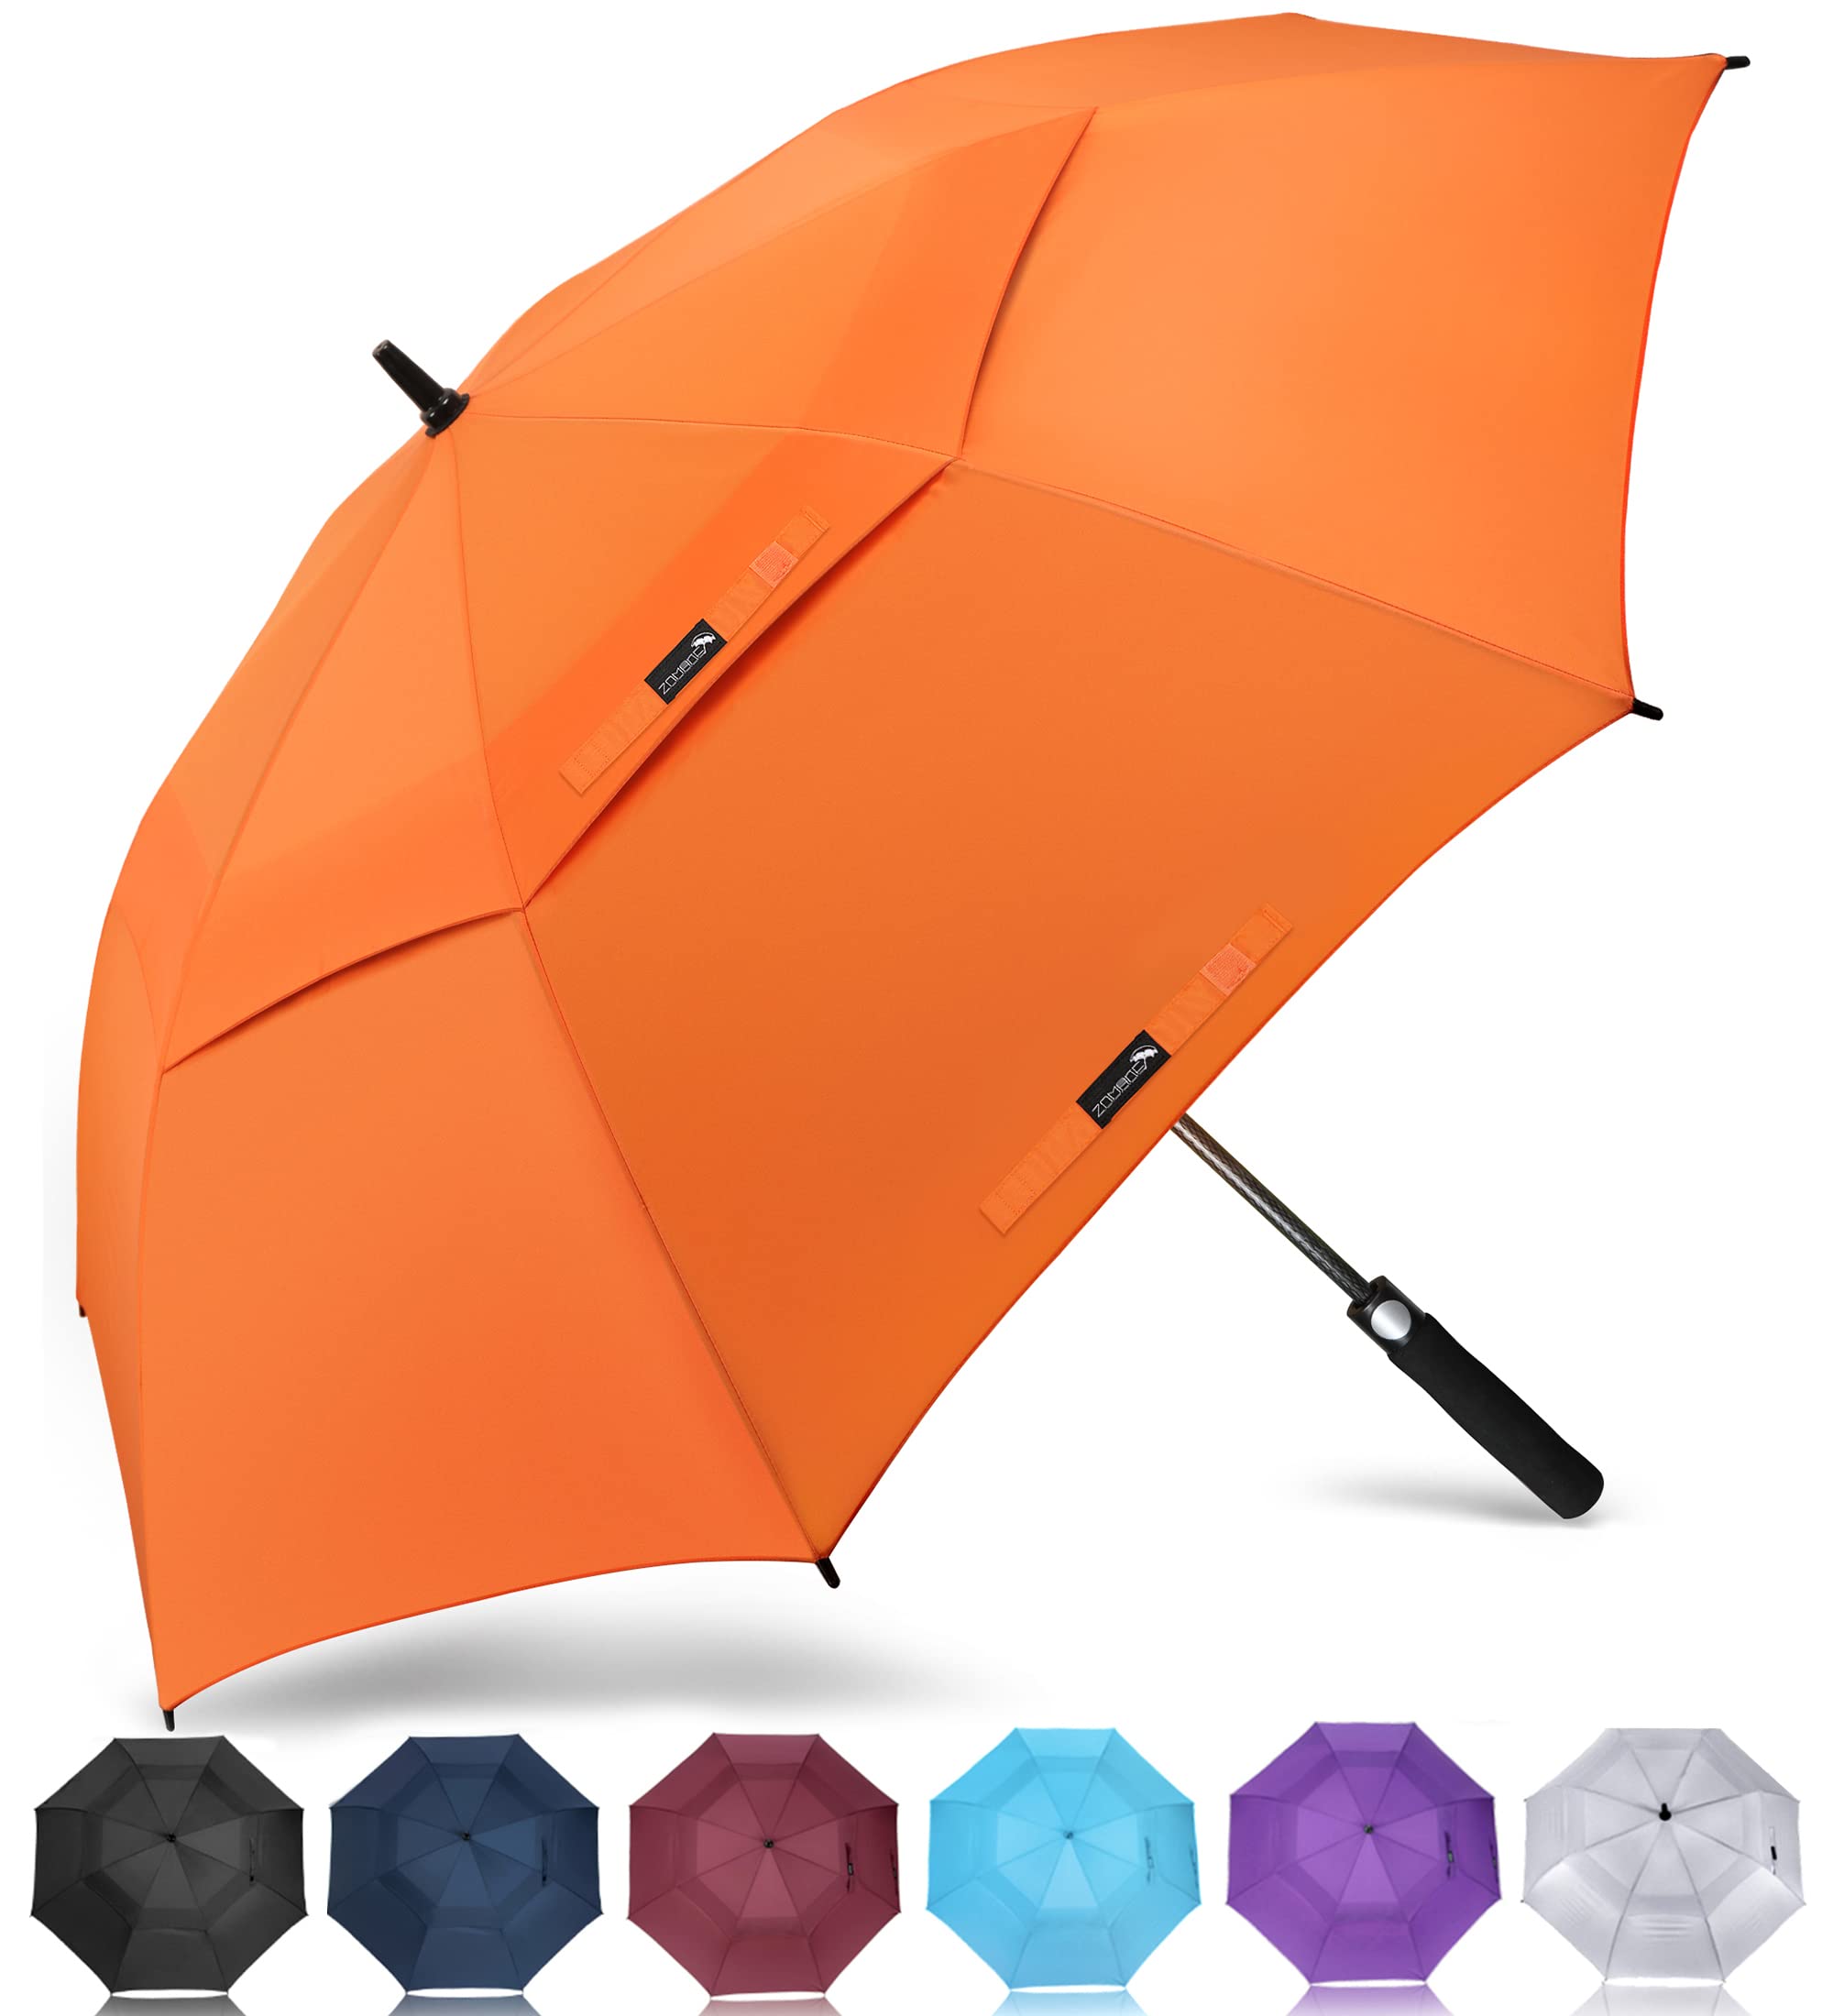 ZOMAKE Large golf Umbrella 68 Inch - Double canopy Vented golf Umbrellas for Rain Windproof Automatic Open golf Push cart Umbrel